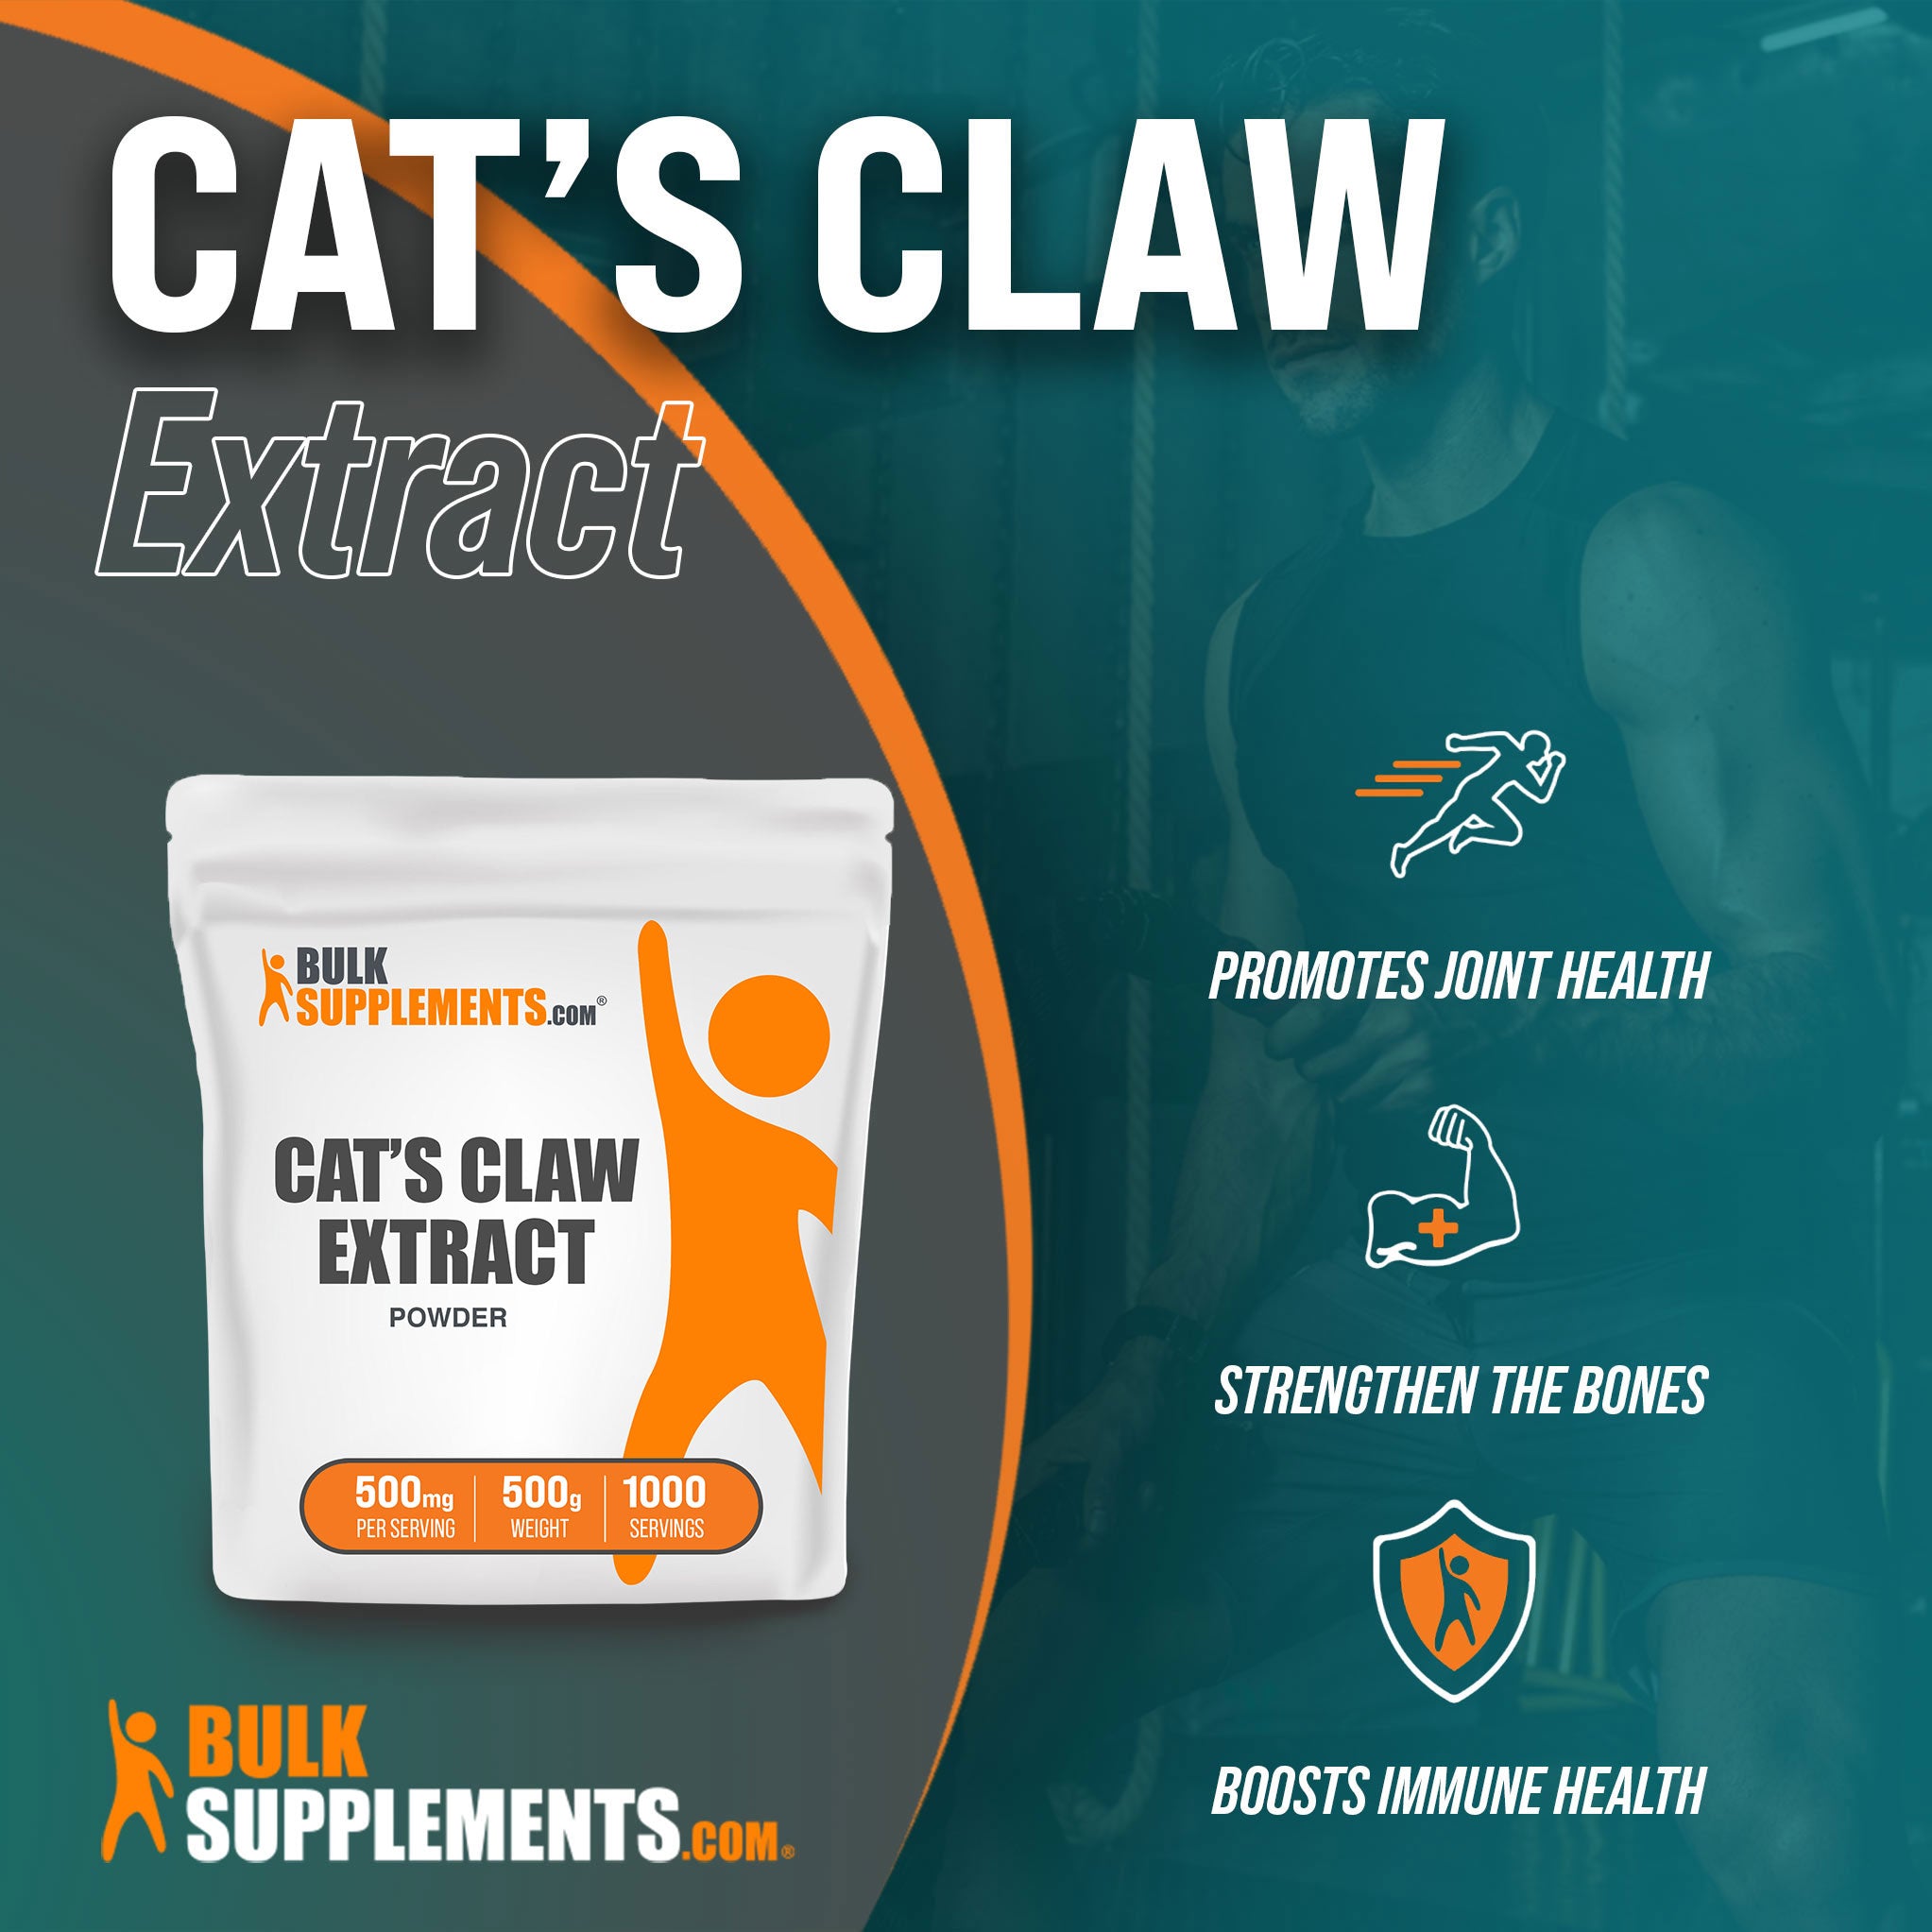 Benefits of Cat's Claw Extract; promotes joint health, strengthen the bones, boosts immune health